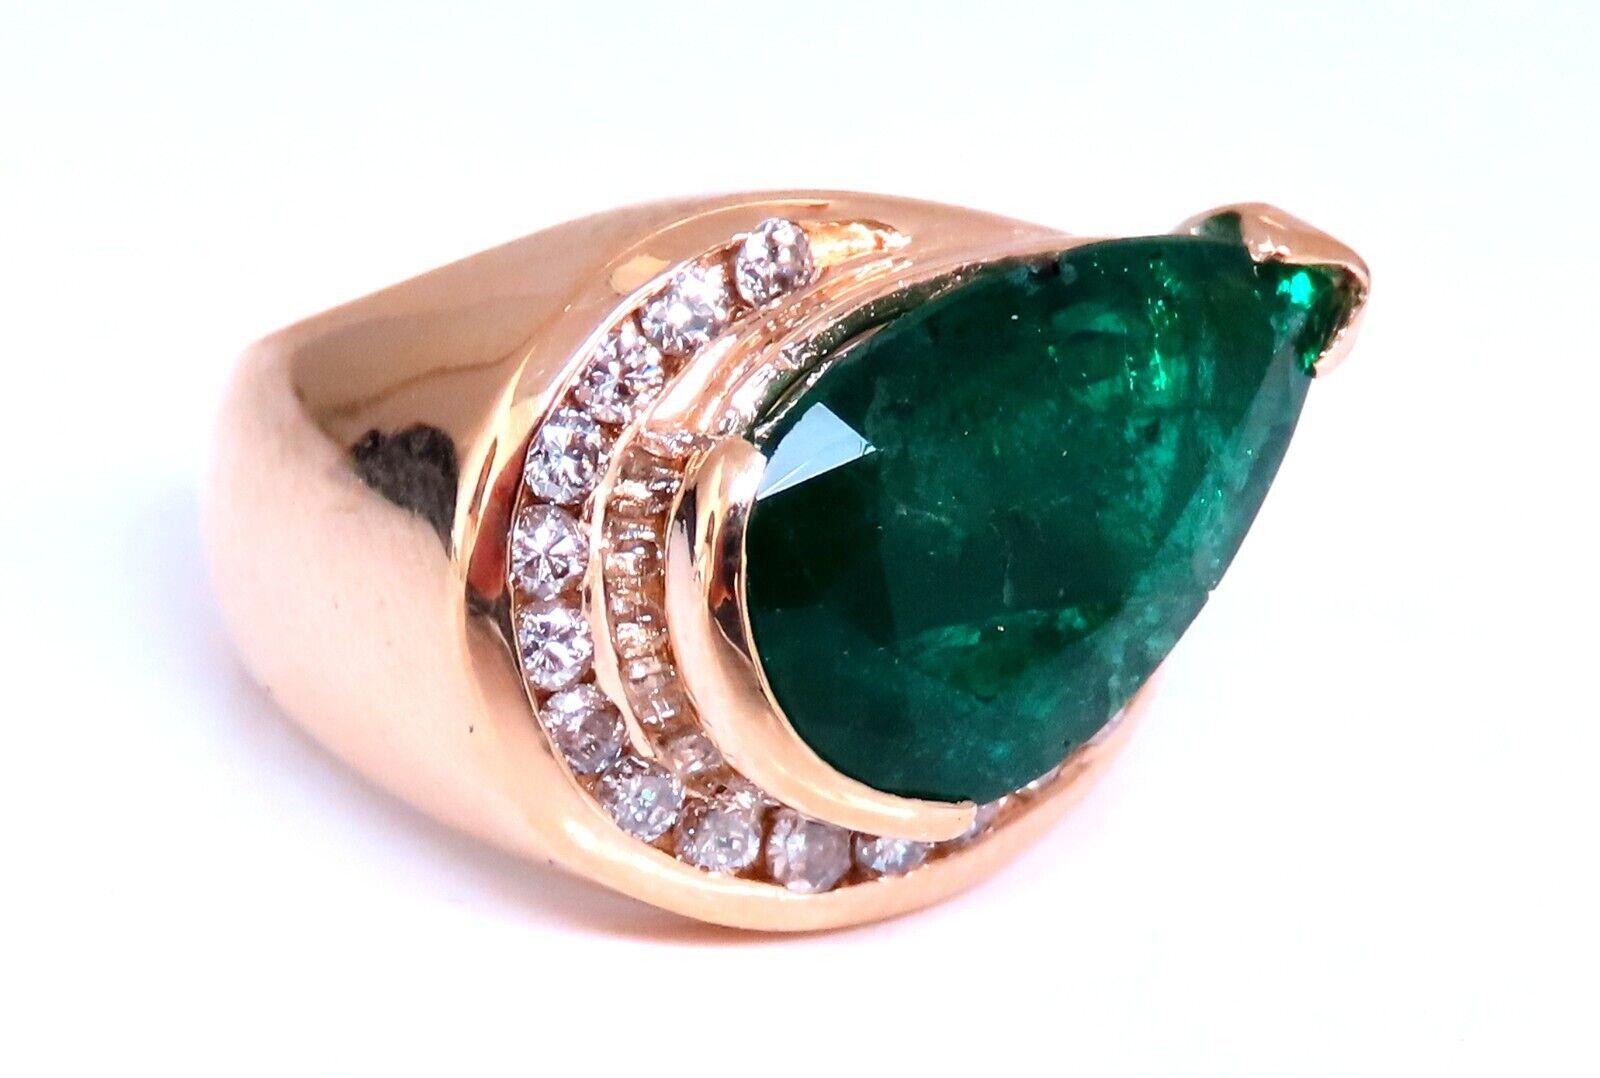 Pear Cluster.

5.10ct. Natural Emerald Ring

Pear cut

12 x 9 mm emerald.

Semi Transparent

14kt. yellow gold

9.7 grams

Ring Current size: 7

Depth of ring: 8mm

14mm wide

$6000 Appraisal Certificate to accompany

(Free Resize Service, Please